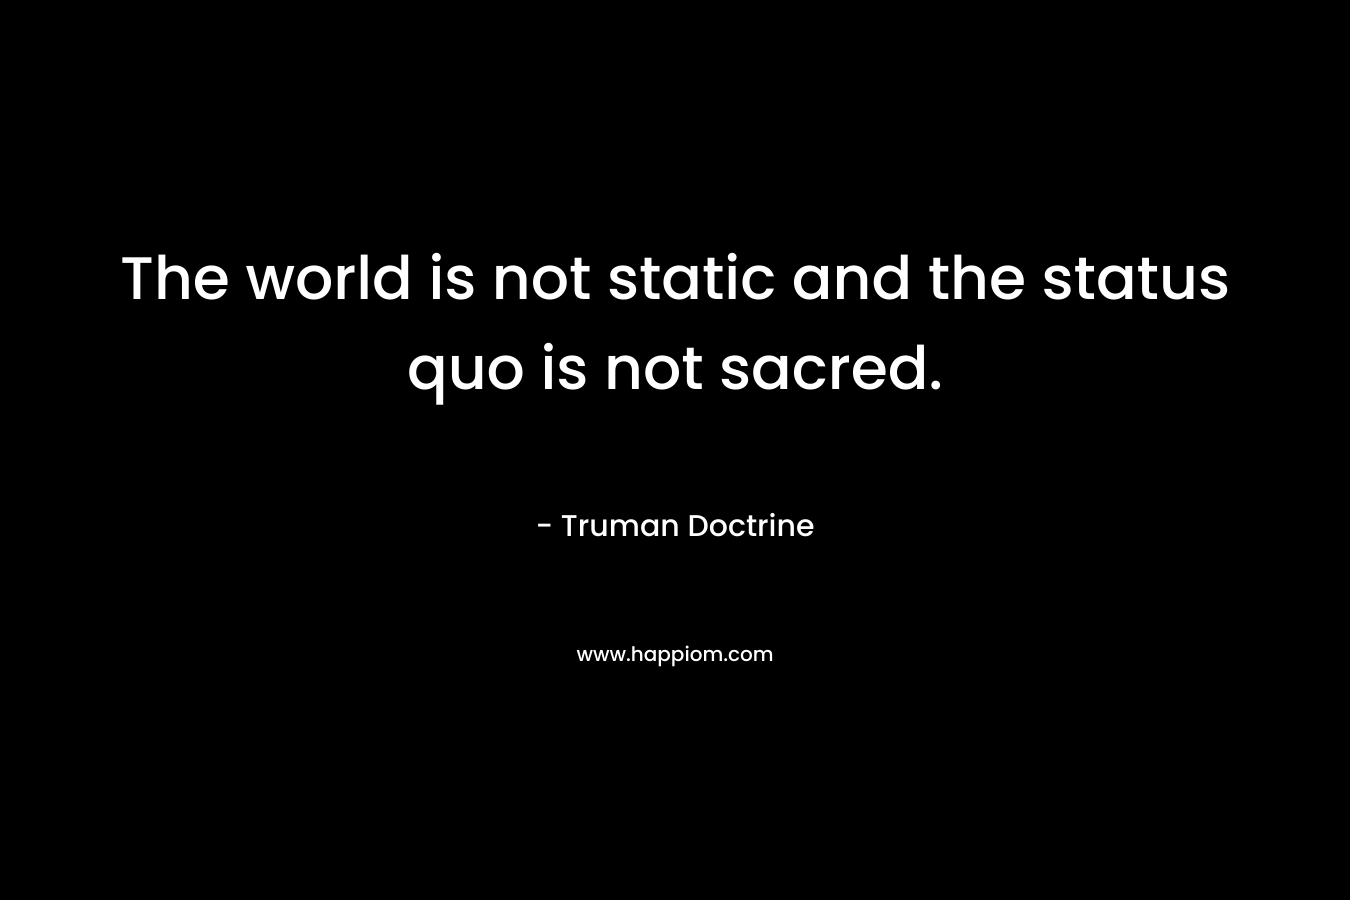 The world is not static and the status quo is not sacred.